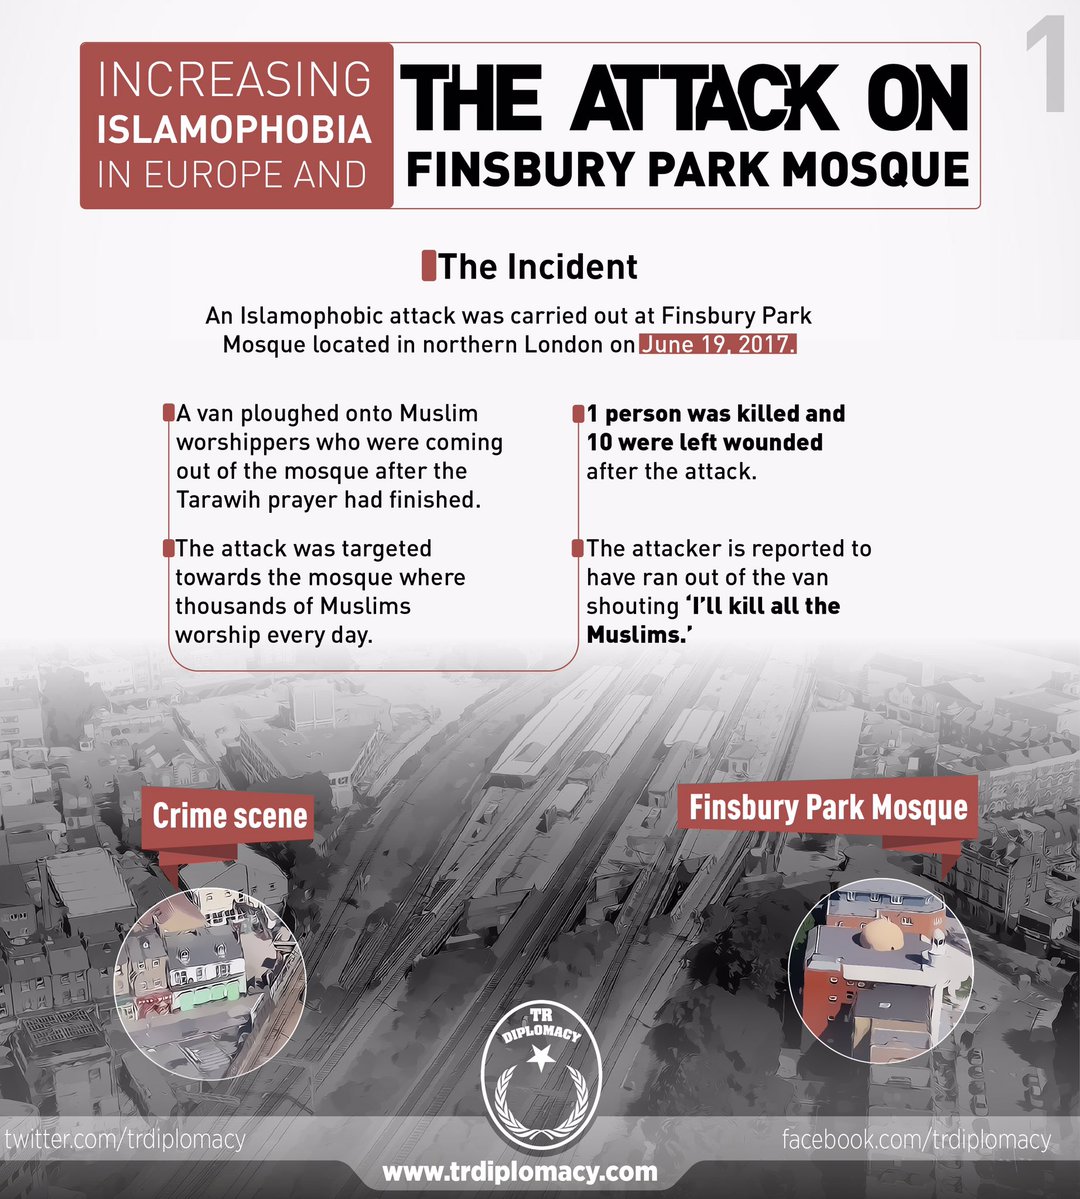 Escalating anti-Islamism in Europe and the terror attack on Finsbury Park Mosque